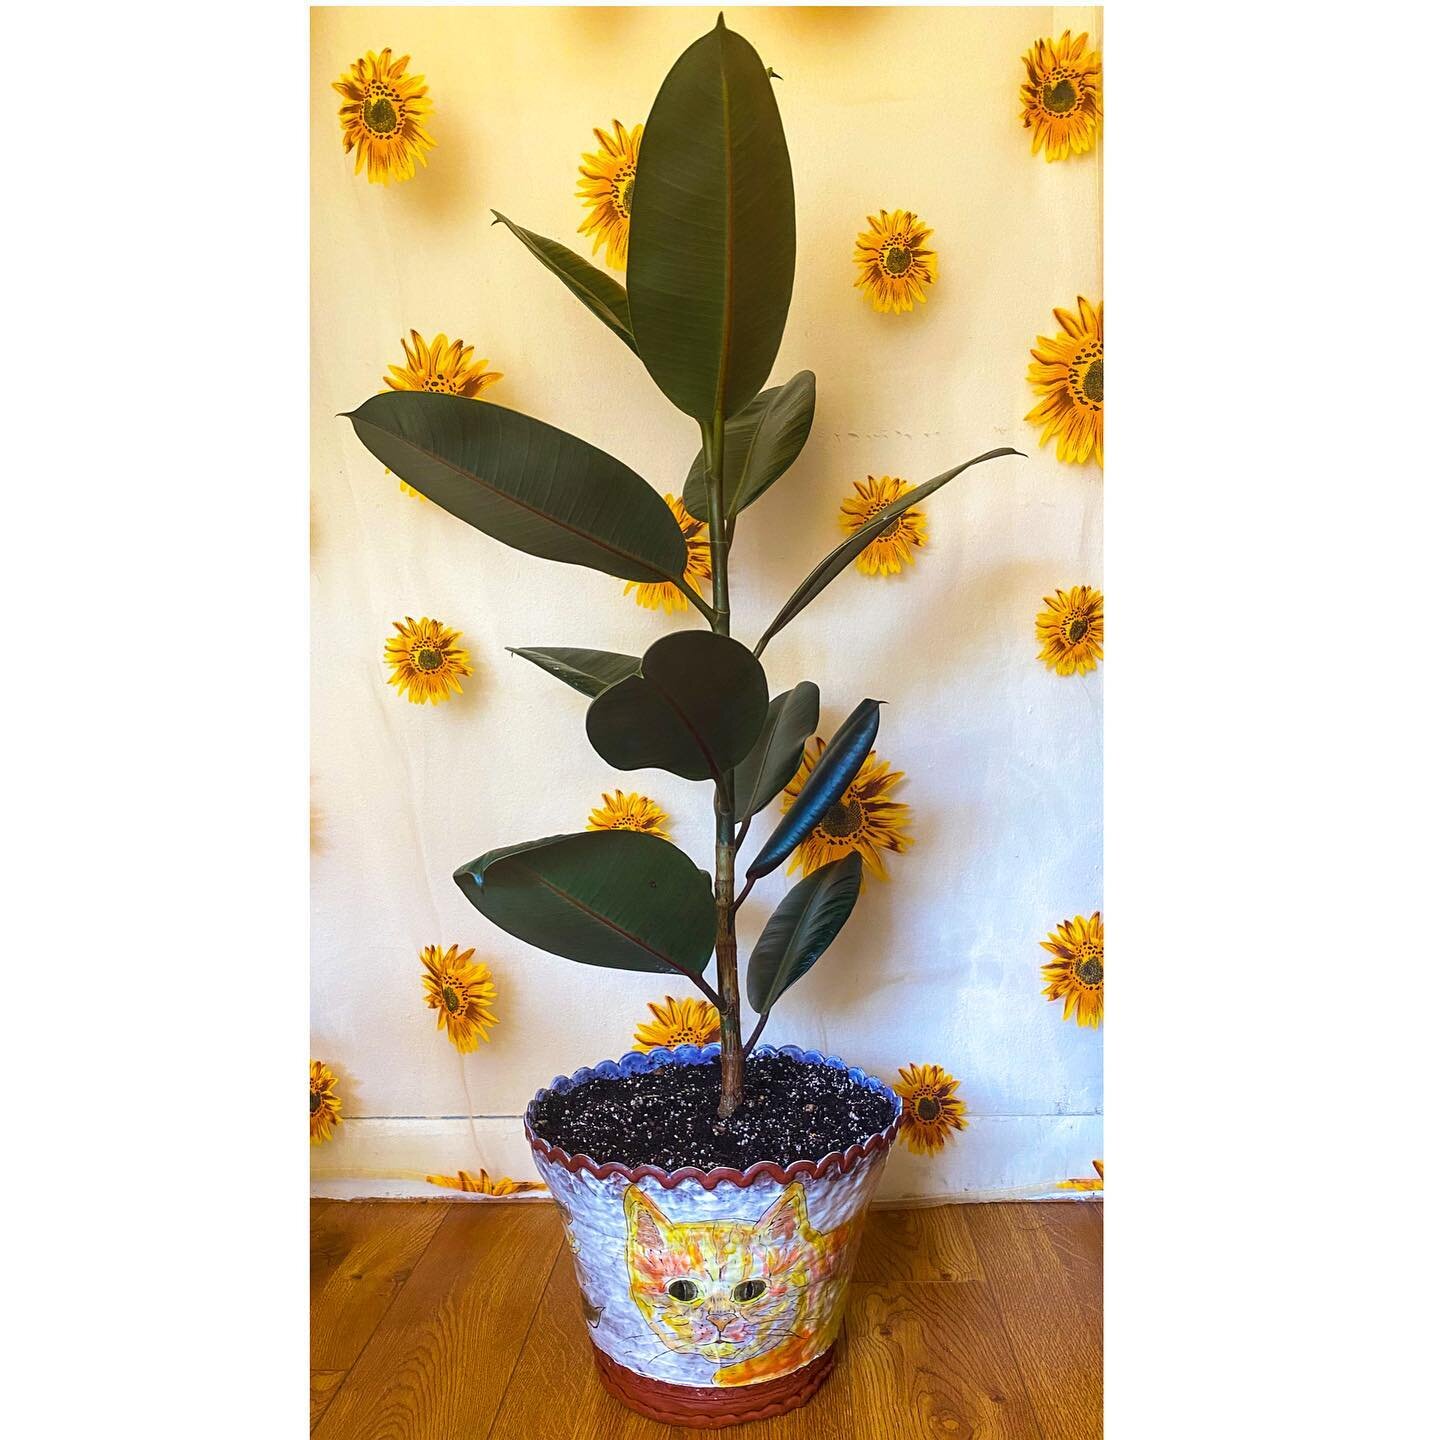 it&rsquo;s difficult to show off a large pot when your rubber plant won&rsquo;t stop growing, but maybe I&rsquo;m more proud of the plant anyway. Roughly one year ago, I lobbed 6 inches off my rubber plant from graduate school. It had been approximat